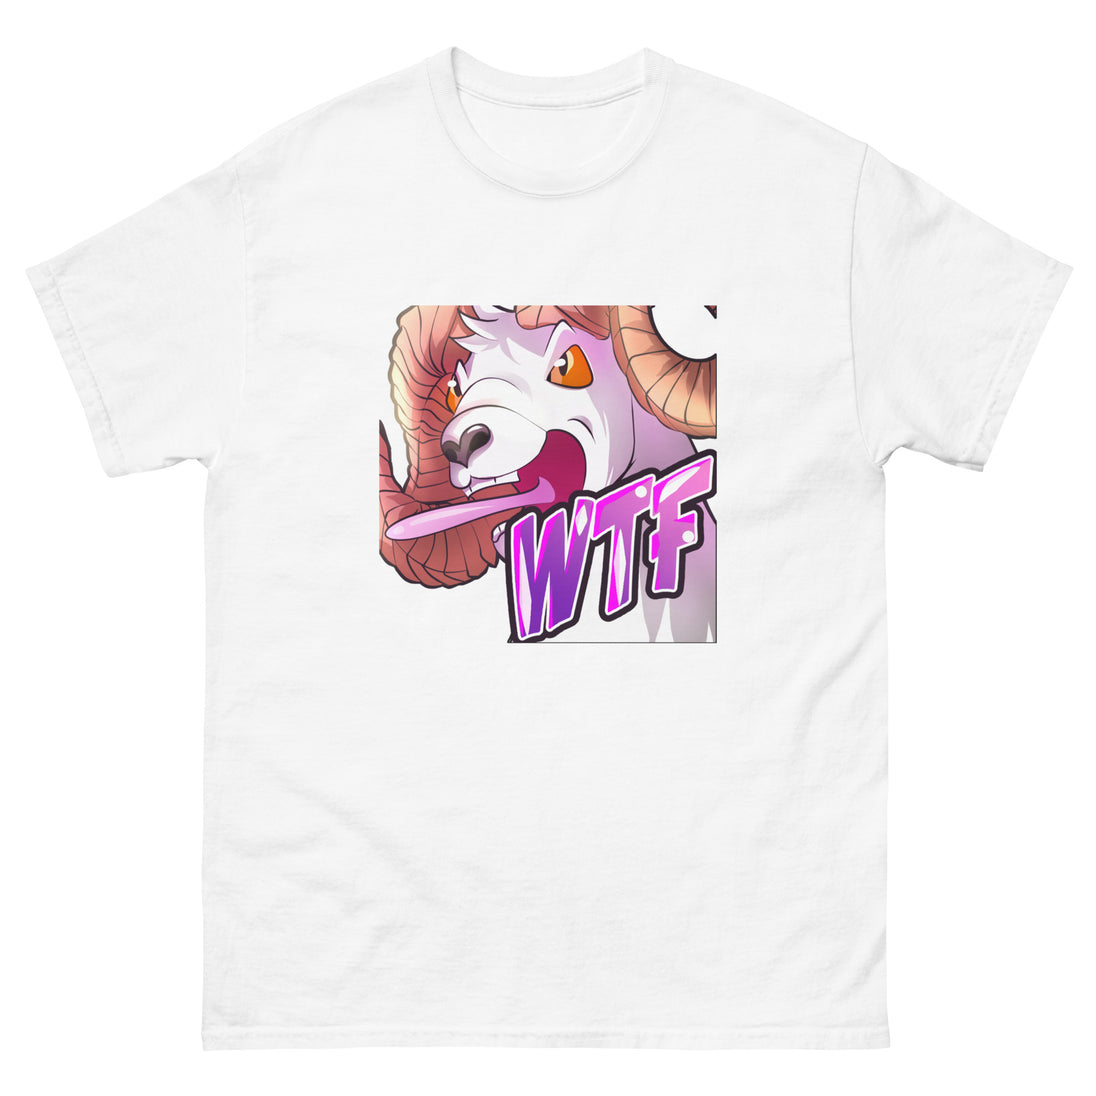 WTF Funny Goat Gamer/Streamer T-Shirt - Soft, Comfortable, and High-Quality